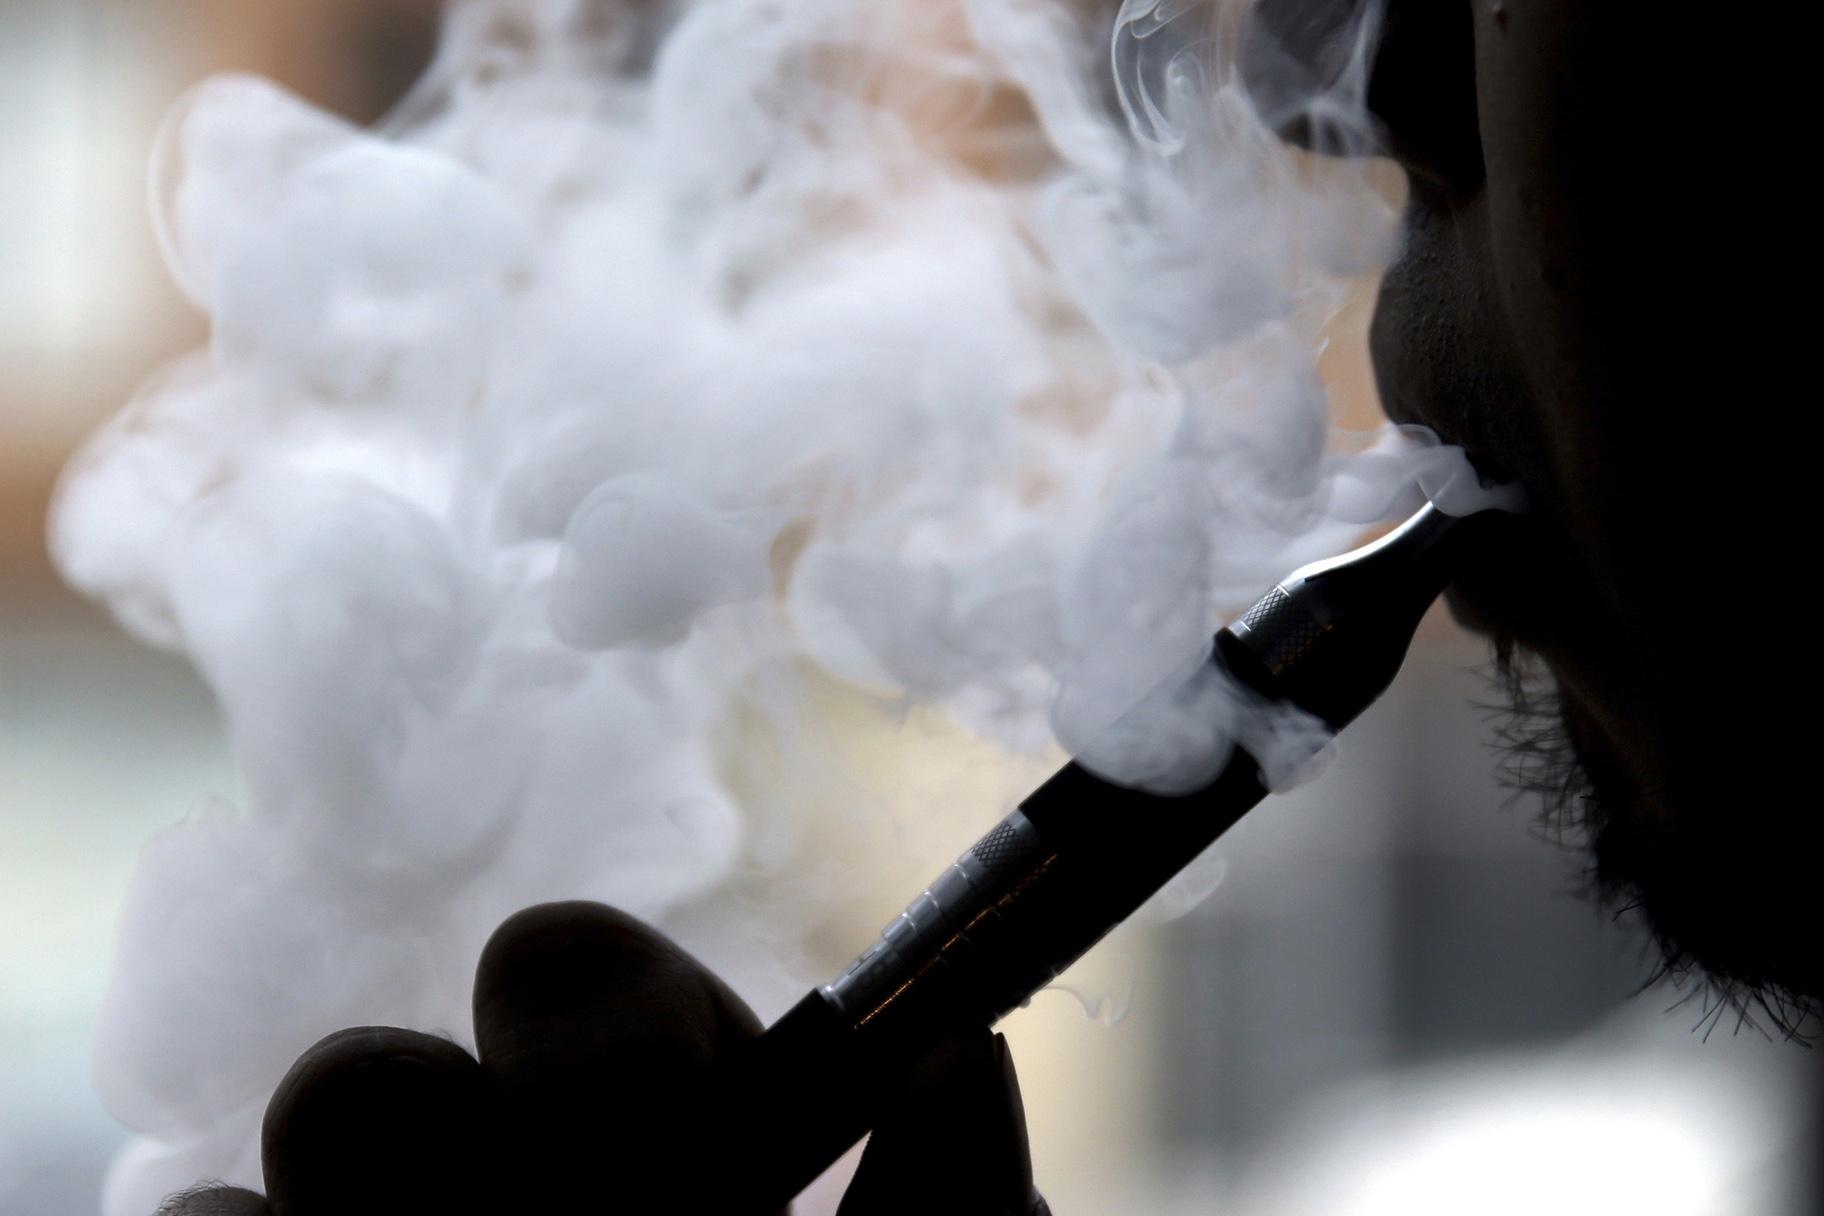 In this April 23, 2014 file photo, a man smokes an electronic cigarette in Chicago. (AP Photo / Nam Y. Huh, File)